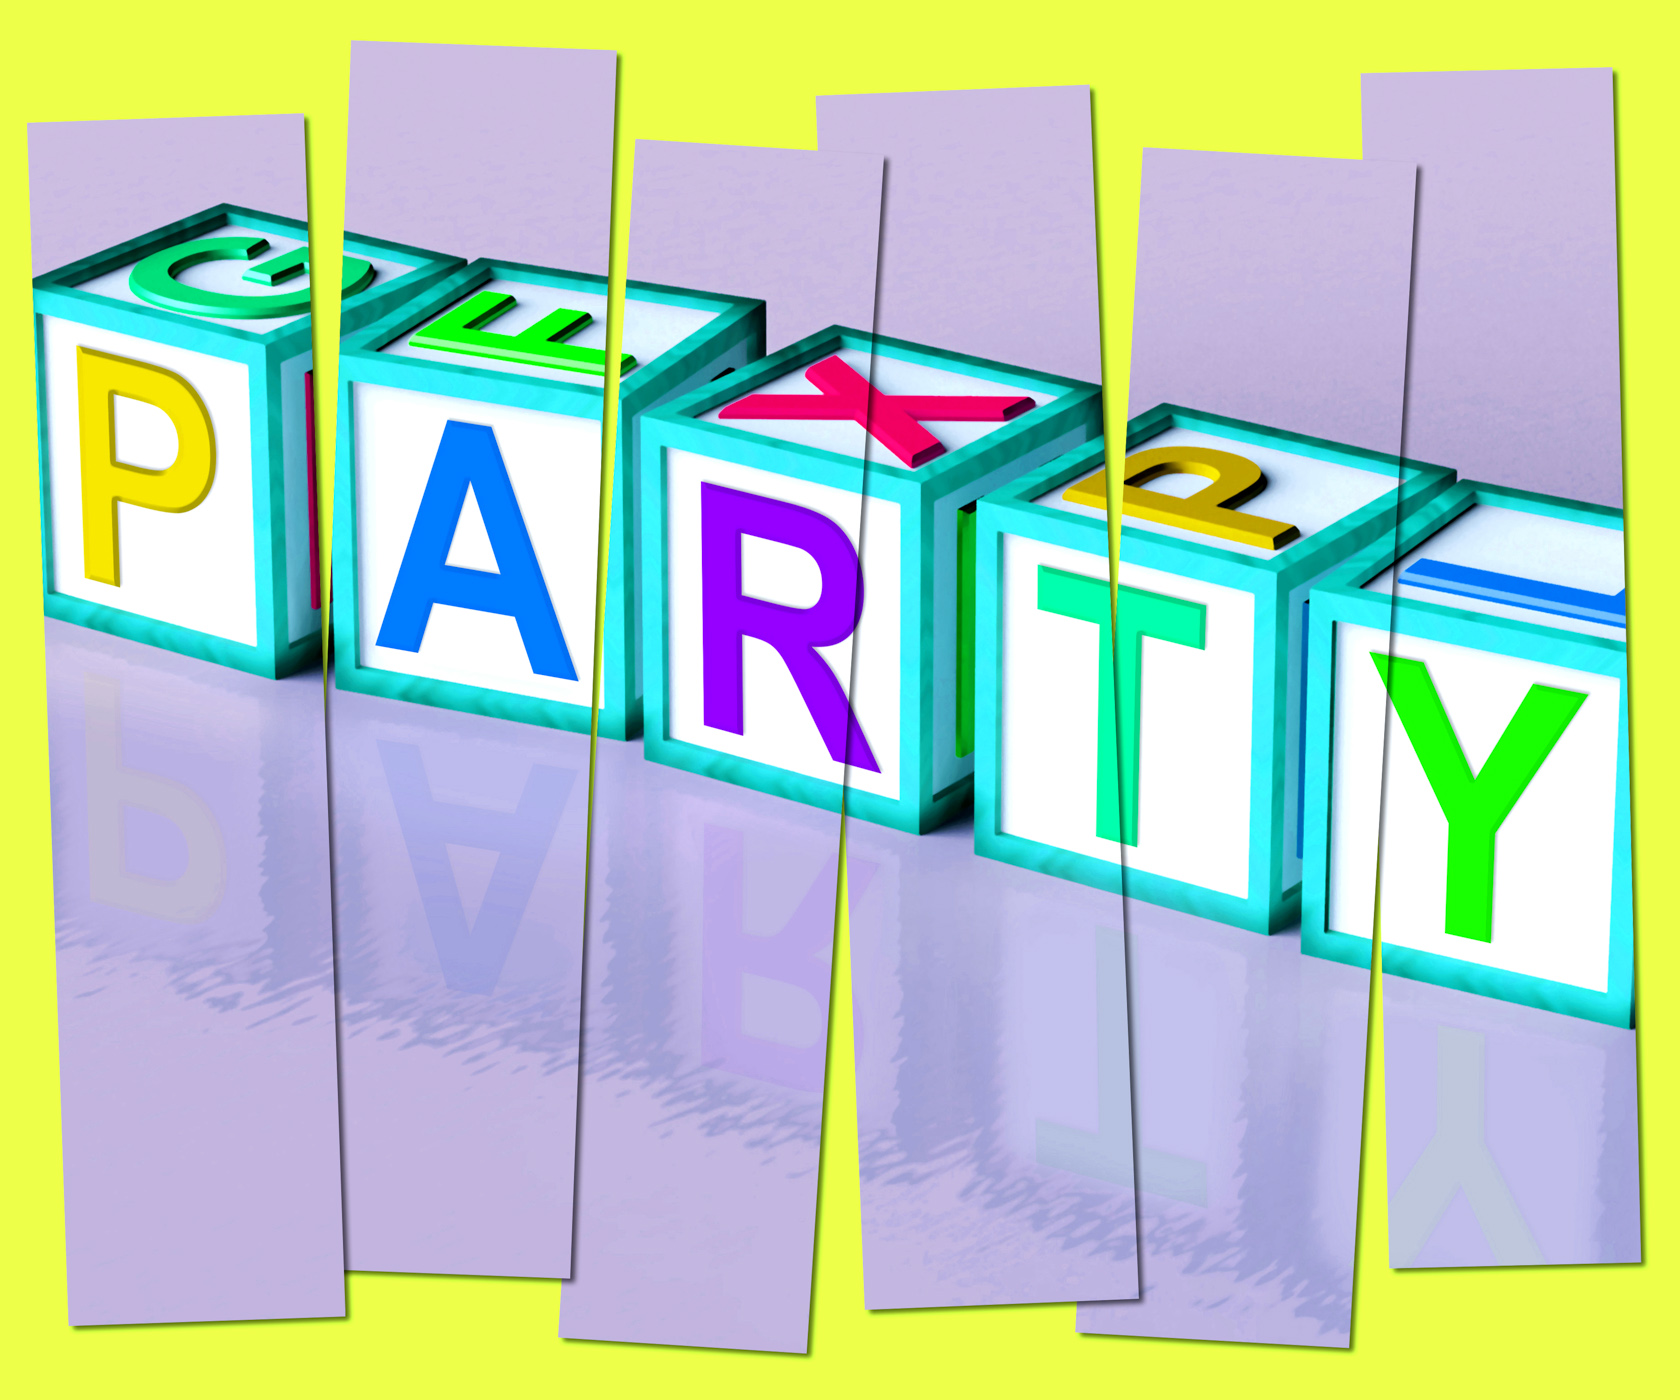 Party word mean function celebrating or drinks photo